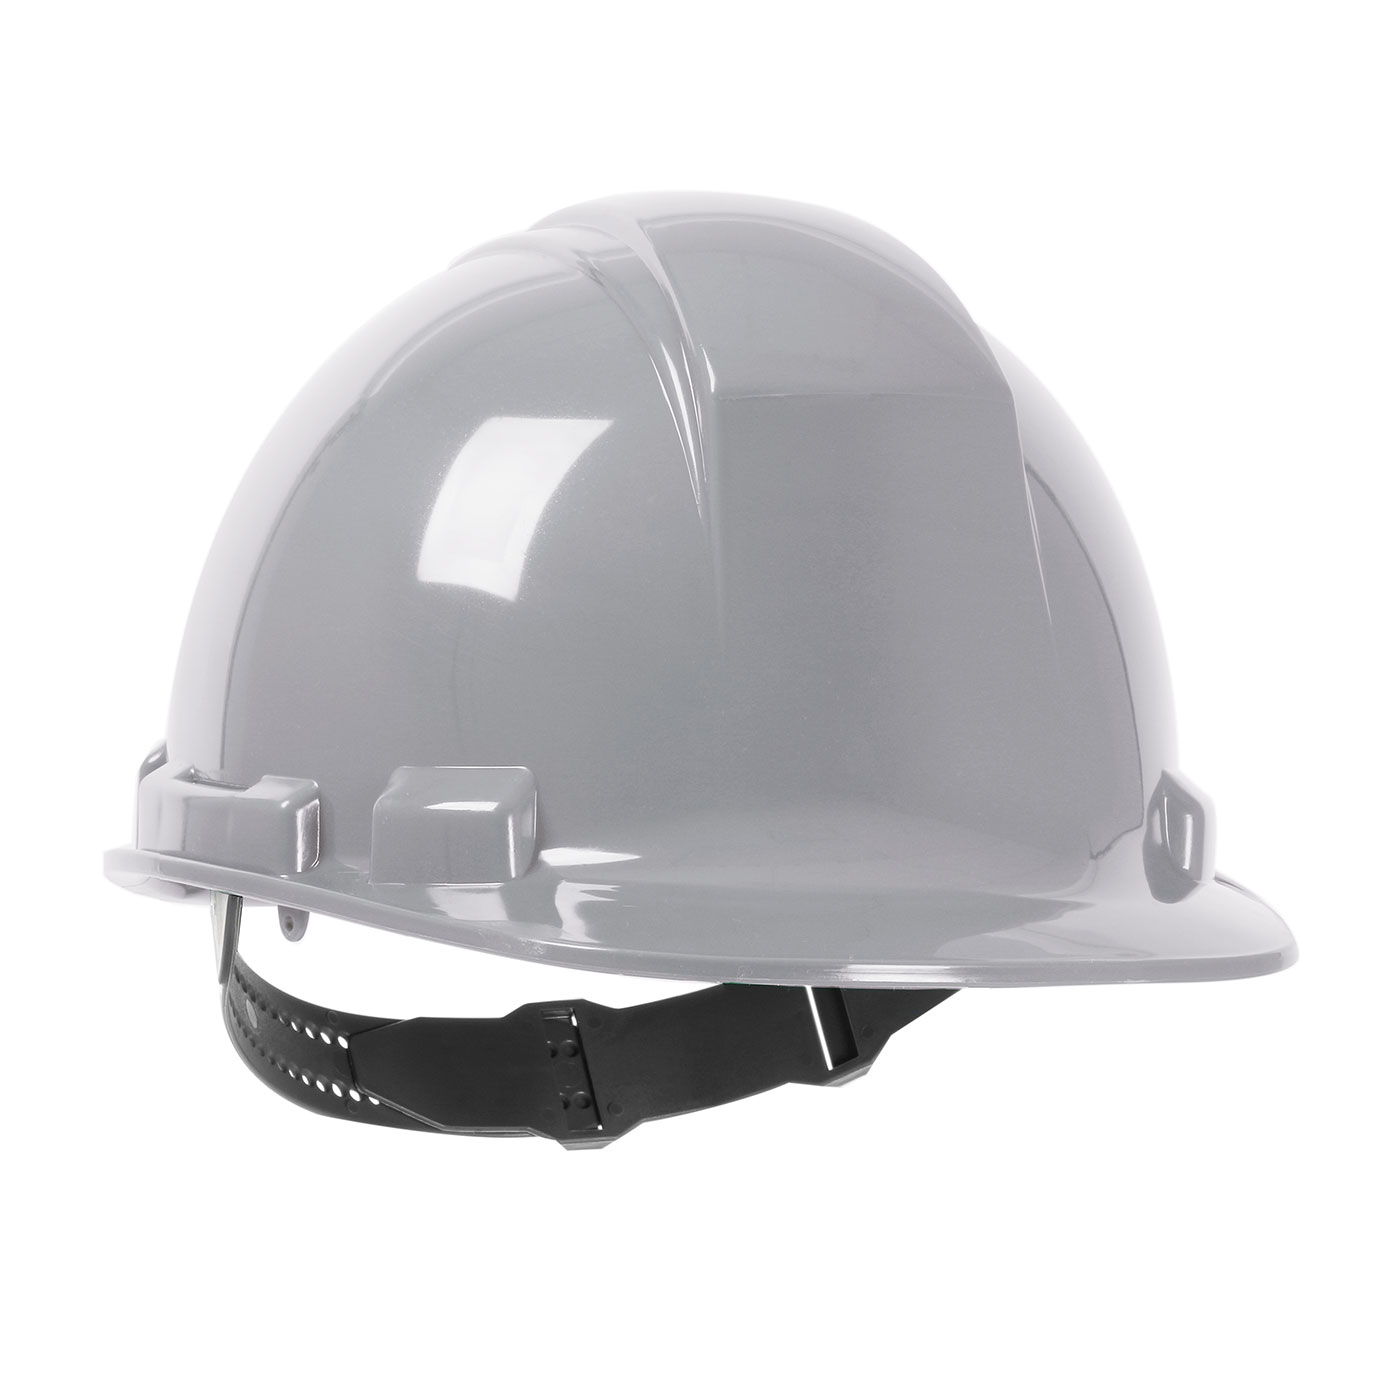 280-HP241 PIP® Dynamic Whistler™ Cap Style Hard Hat with HDPE Shell, 4-Point Textile Suspension and Pin-Lock Adjustment - Gray